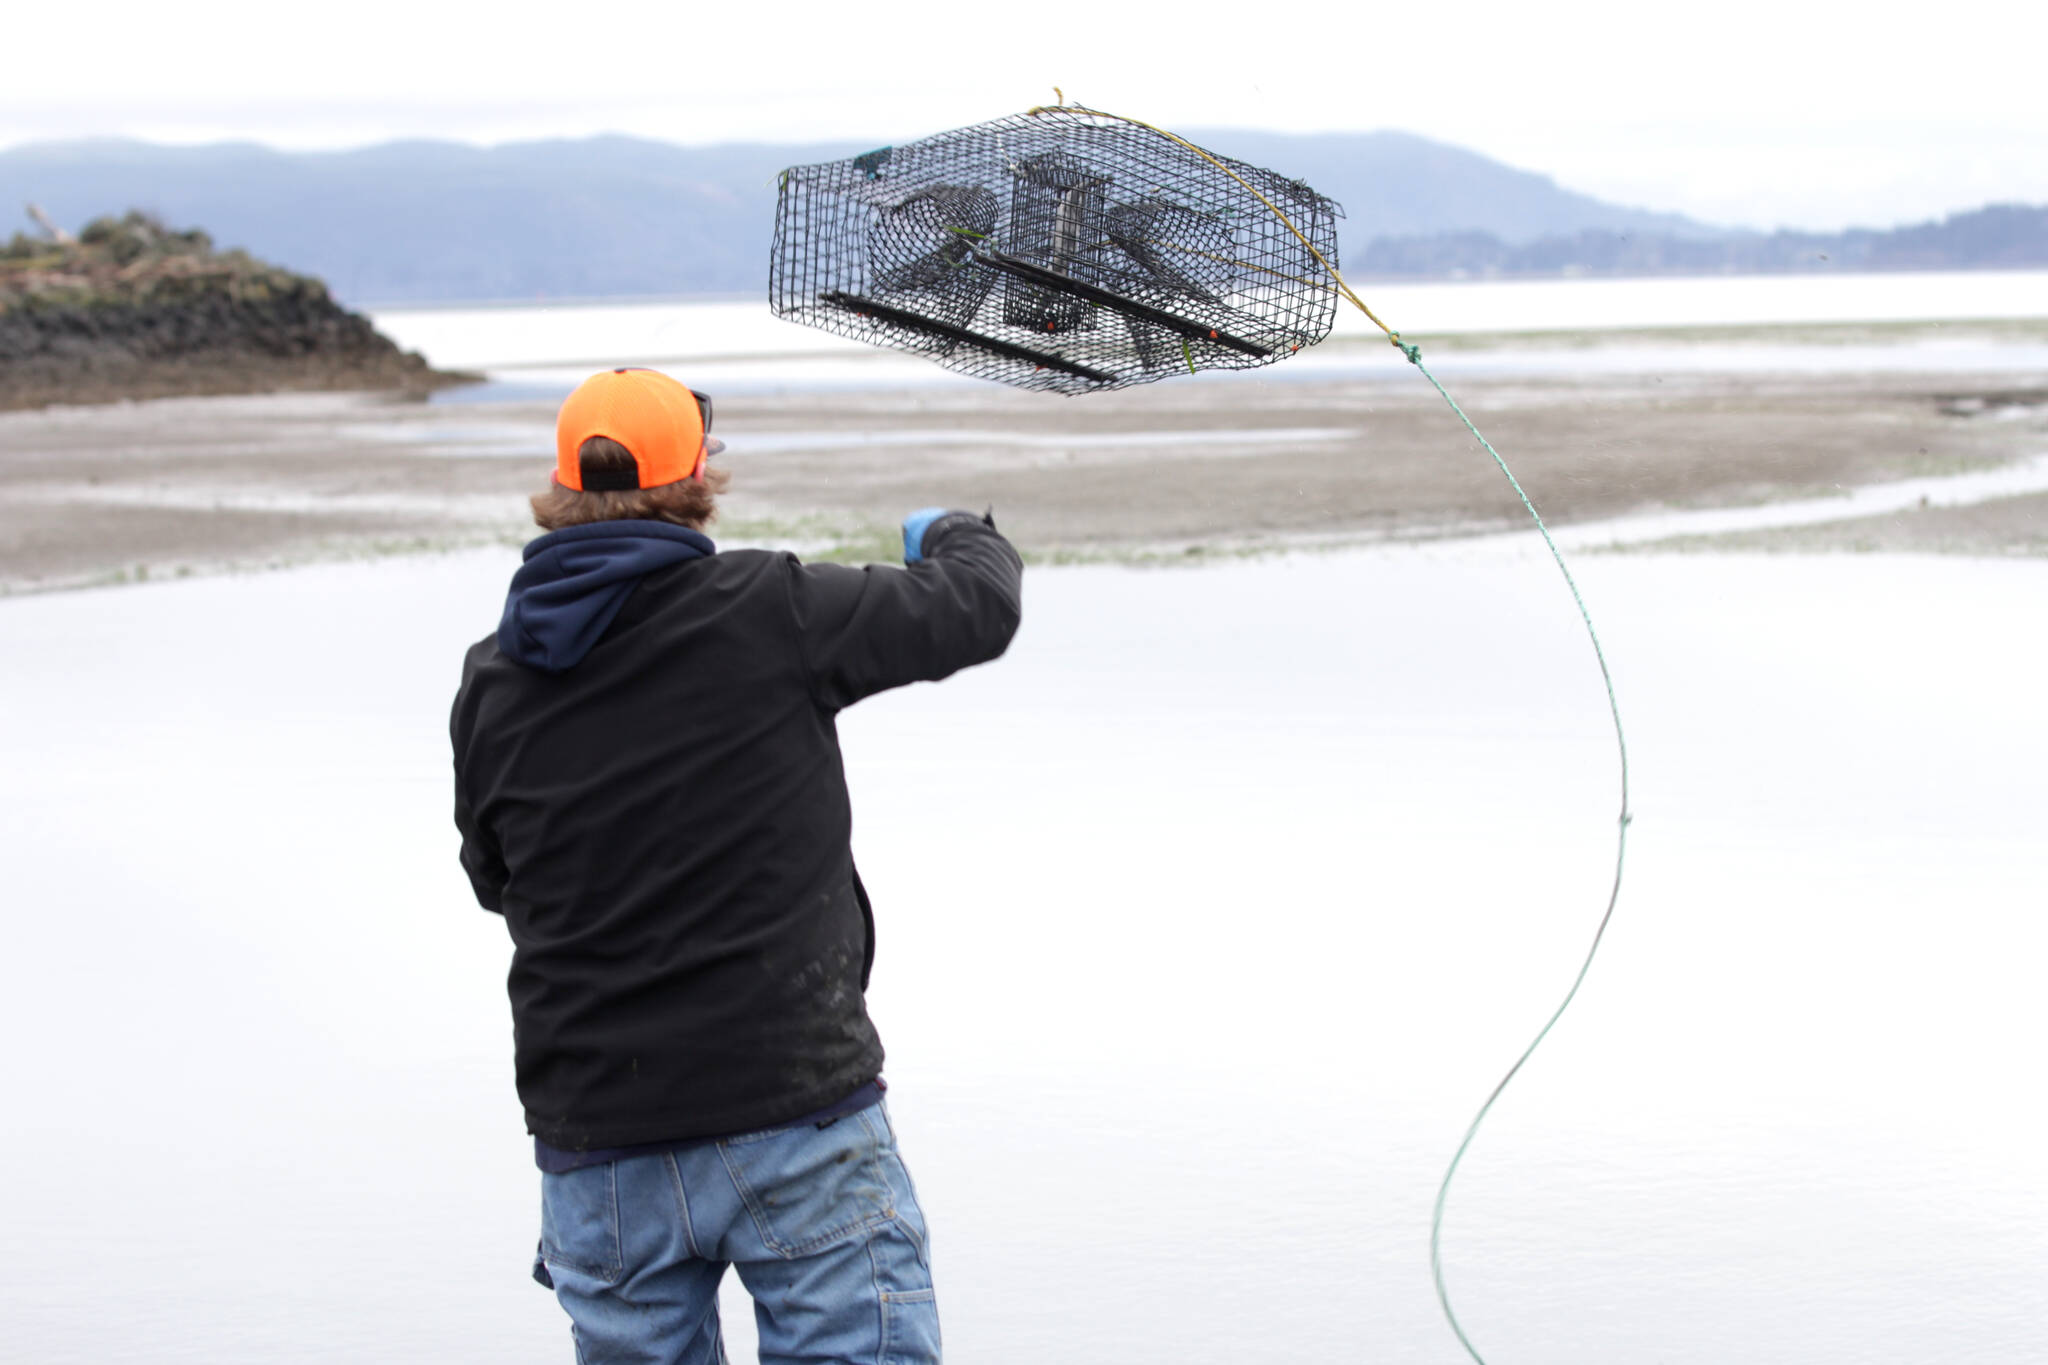 Richard Ashley, part of the Shoalwater Bay Indian Tribe’s Department of Natural Resources, resets a crab trap as members of the department remove of European green crabs on Jan. 26. (MIchael S. Lockett / The Daily World)